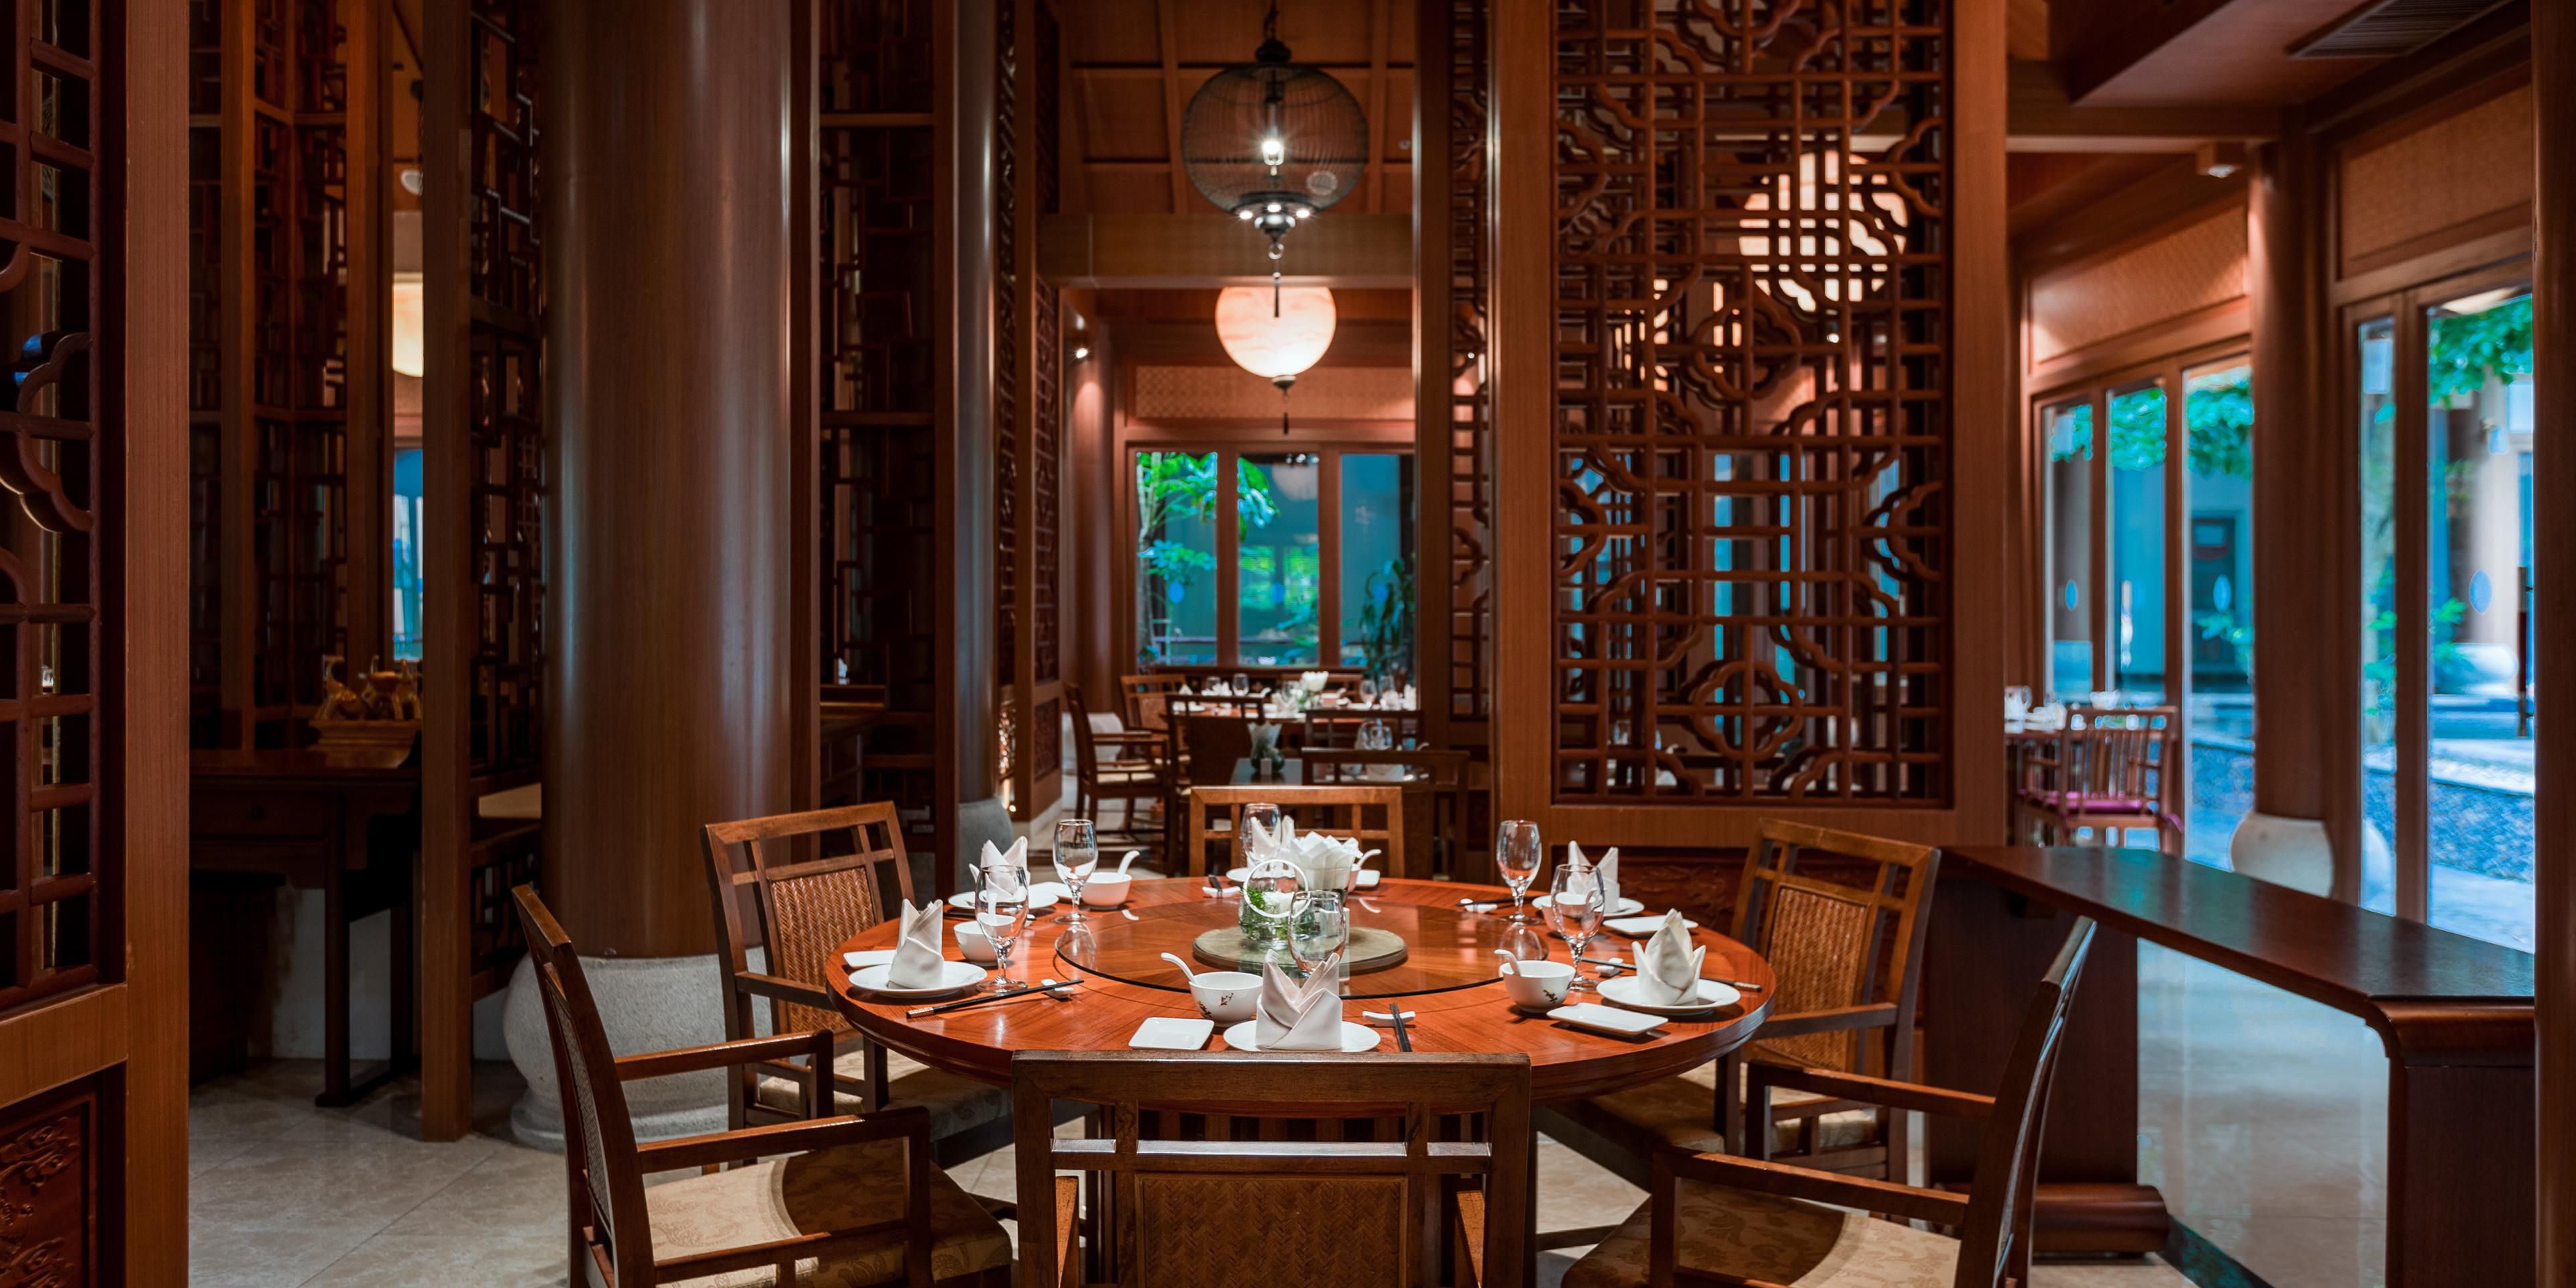 Man Lin Chinese restaurant offers spacious, private dining rooms of varying sizes to go with its main dining room and uniquely designed courtyard seating. Open for lunch and dinner daily, our chefs specialize in genuine Yunnan, Sichuan and delicate Cantonese cuisine.